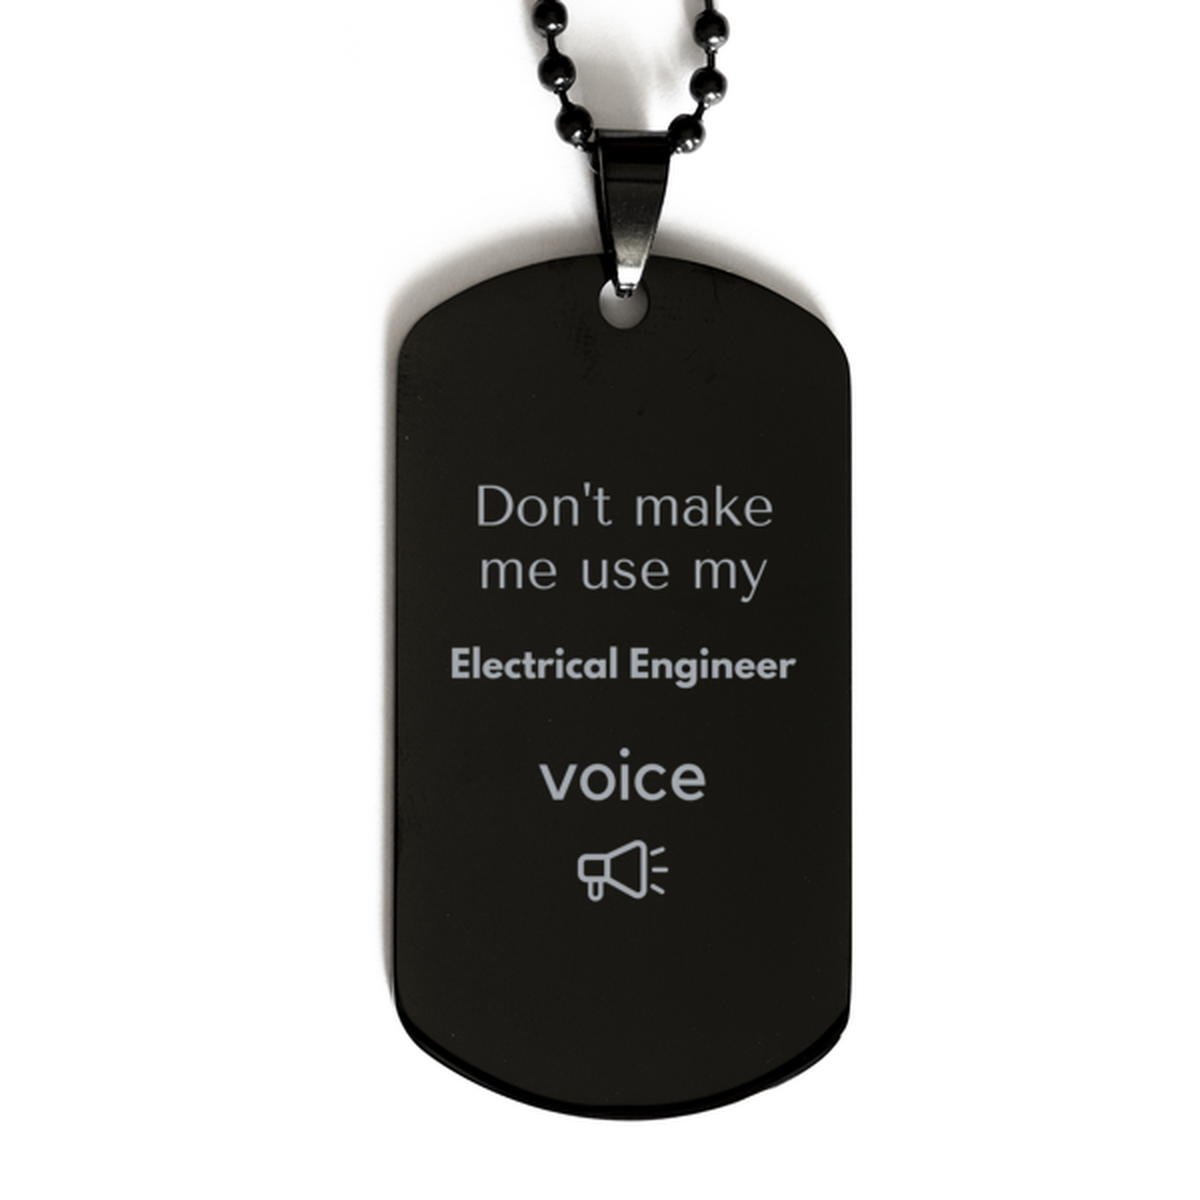 Don't make me use my Electrical Engineer voice, Sarcasm Electrical Engineer Gifts, Christmas Electrical Engineer Black Dog Tag Birthday Unique Gifts For Electrical Engineer Coworkers, Men, Women, Colleague, Friends